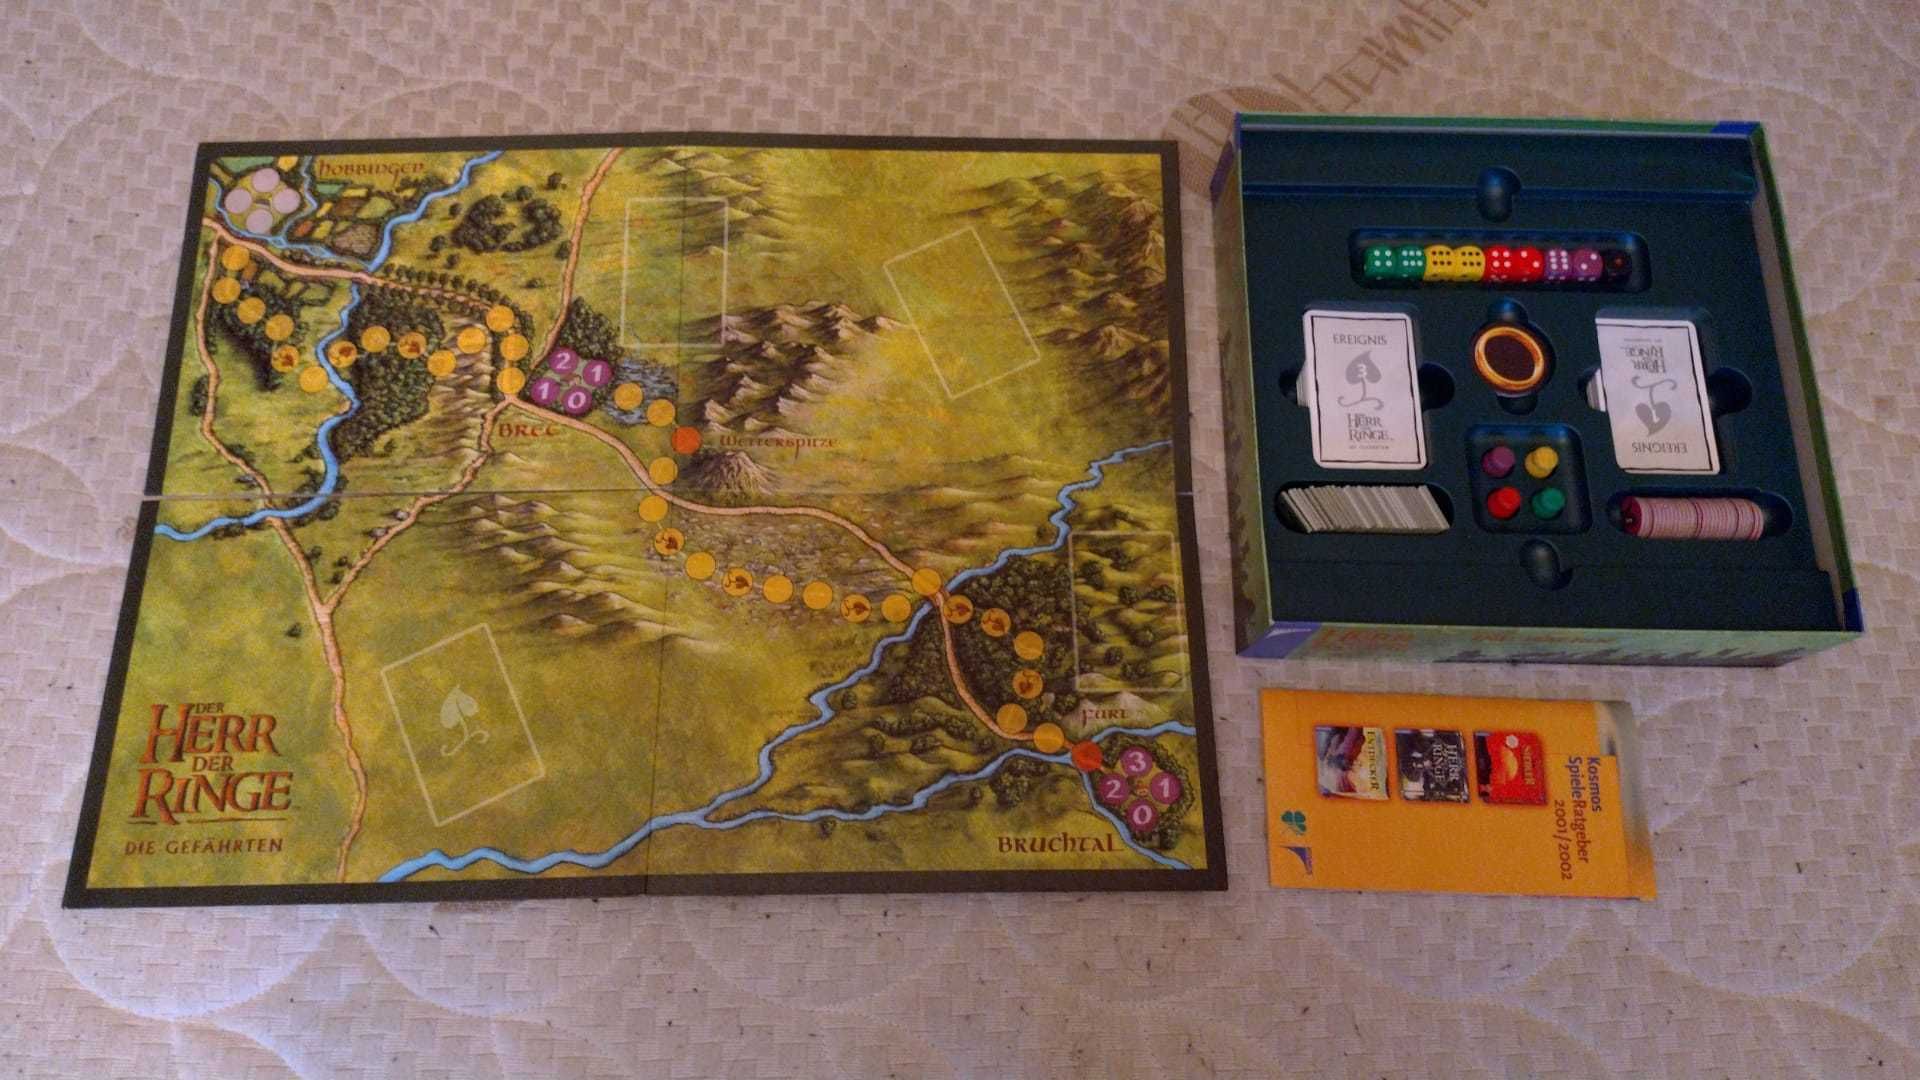 Boardgame Lord Of the Rings - The Fellowship